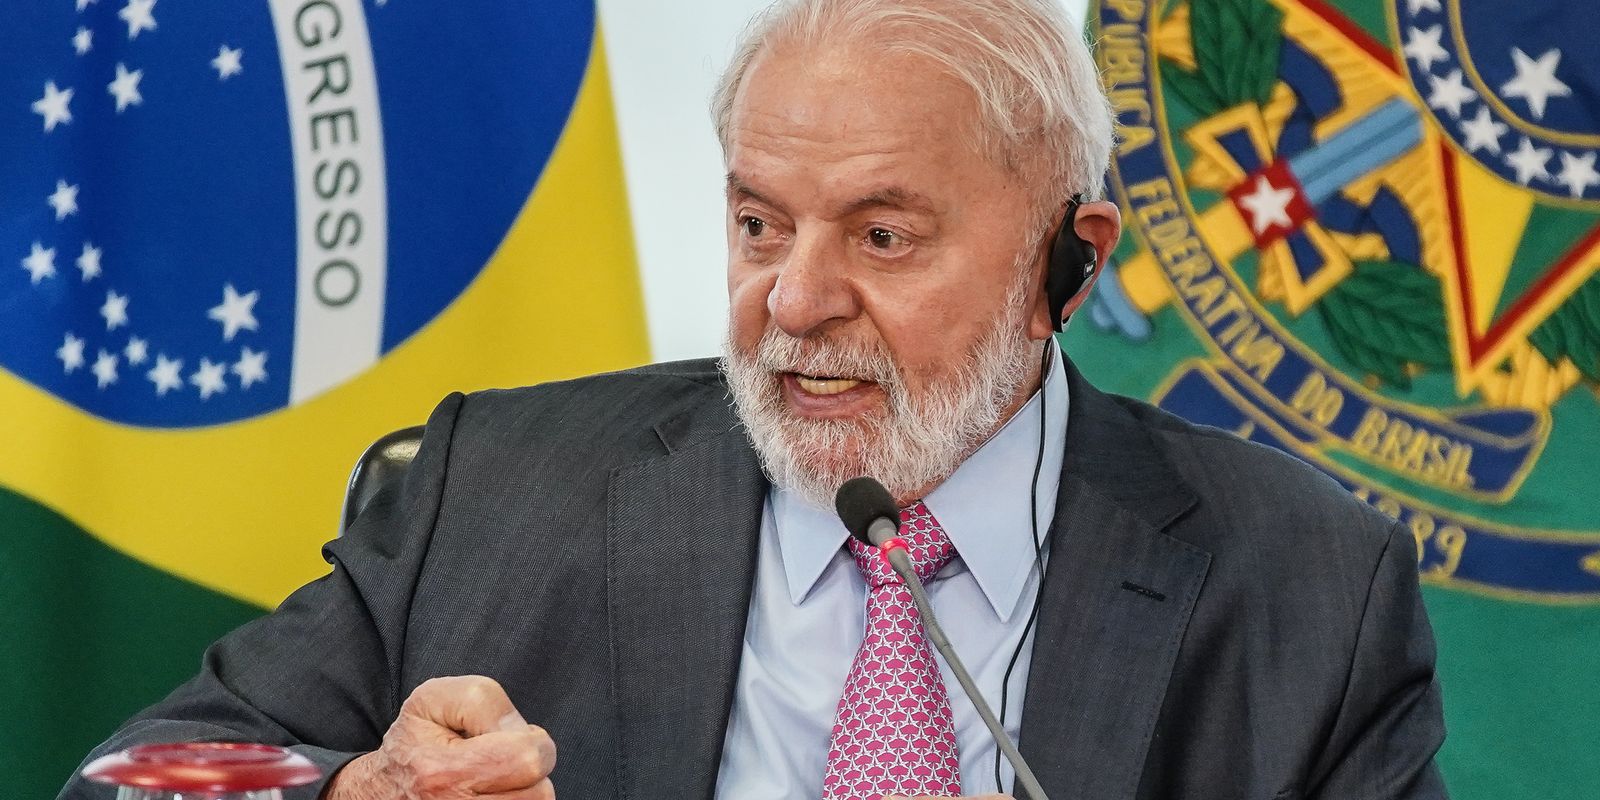 Lula will have at least five bilateral meetings during the G7